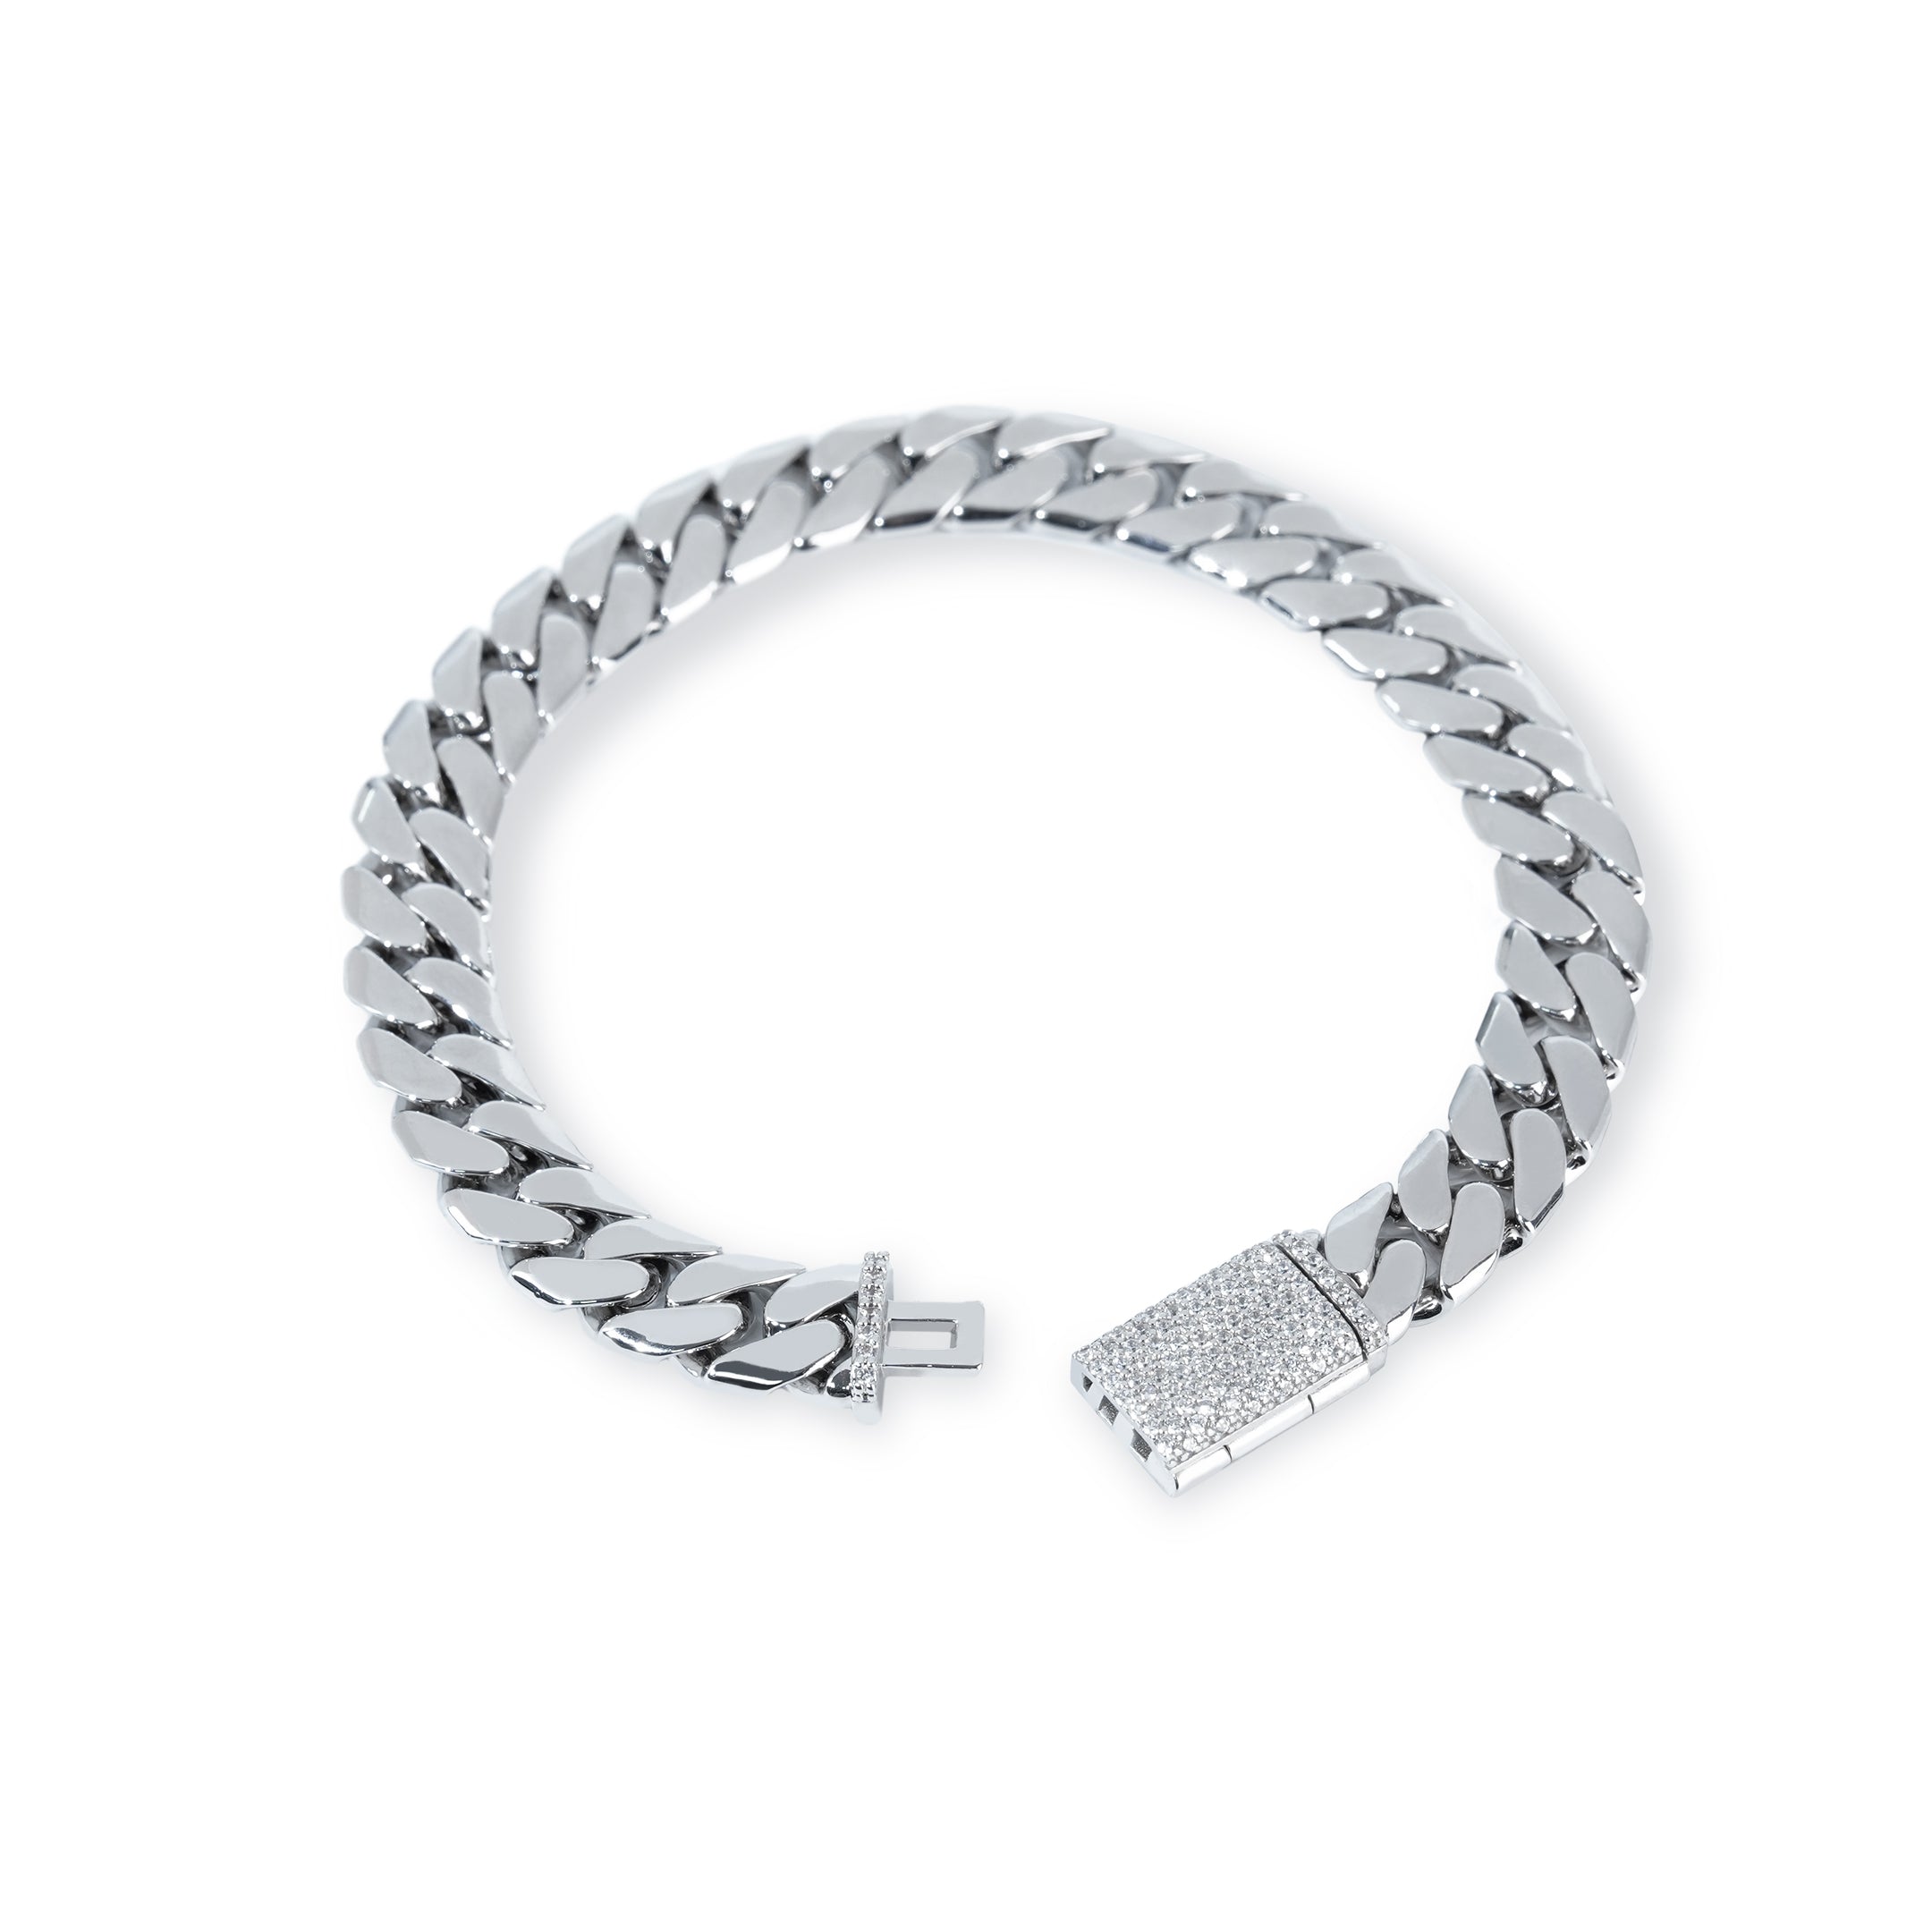 New Release Iced Clasp Prong Miami Cuban Link Bracelet